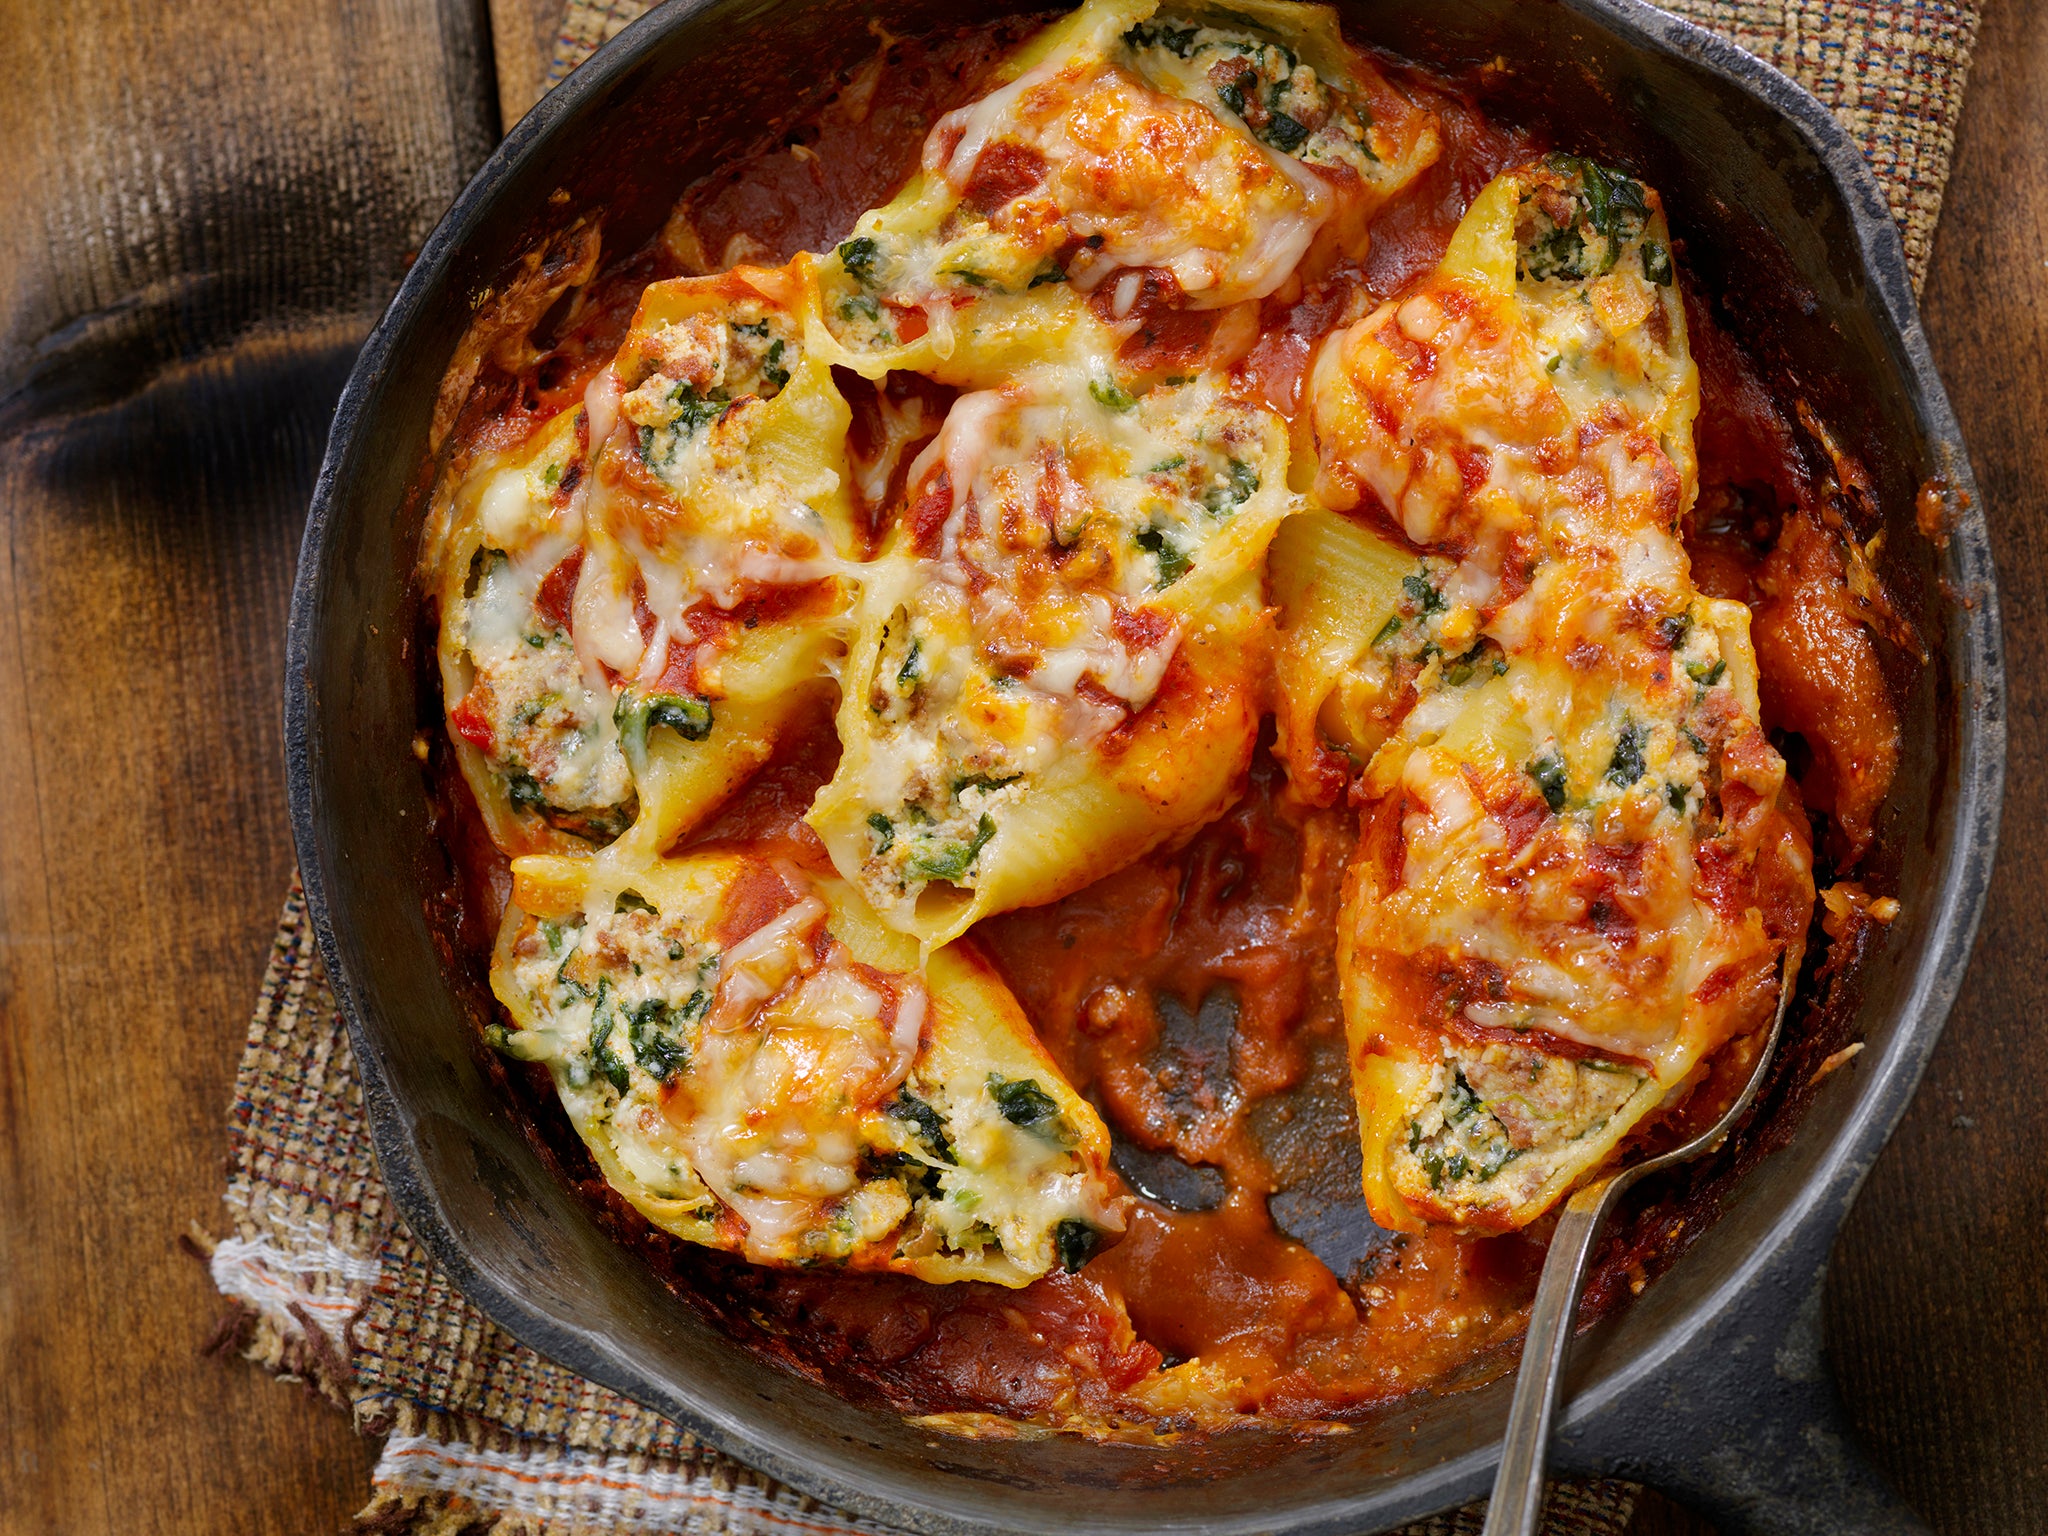 Of all the baked pasta dishes, stuffed shells are beloved for good reason